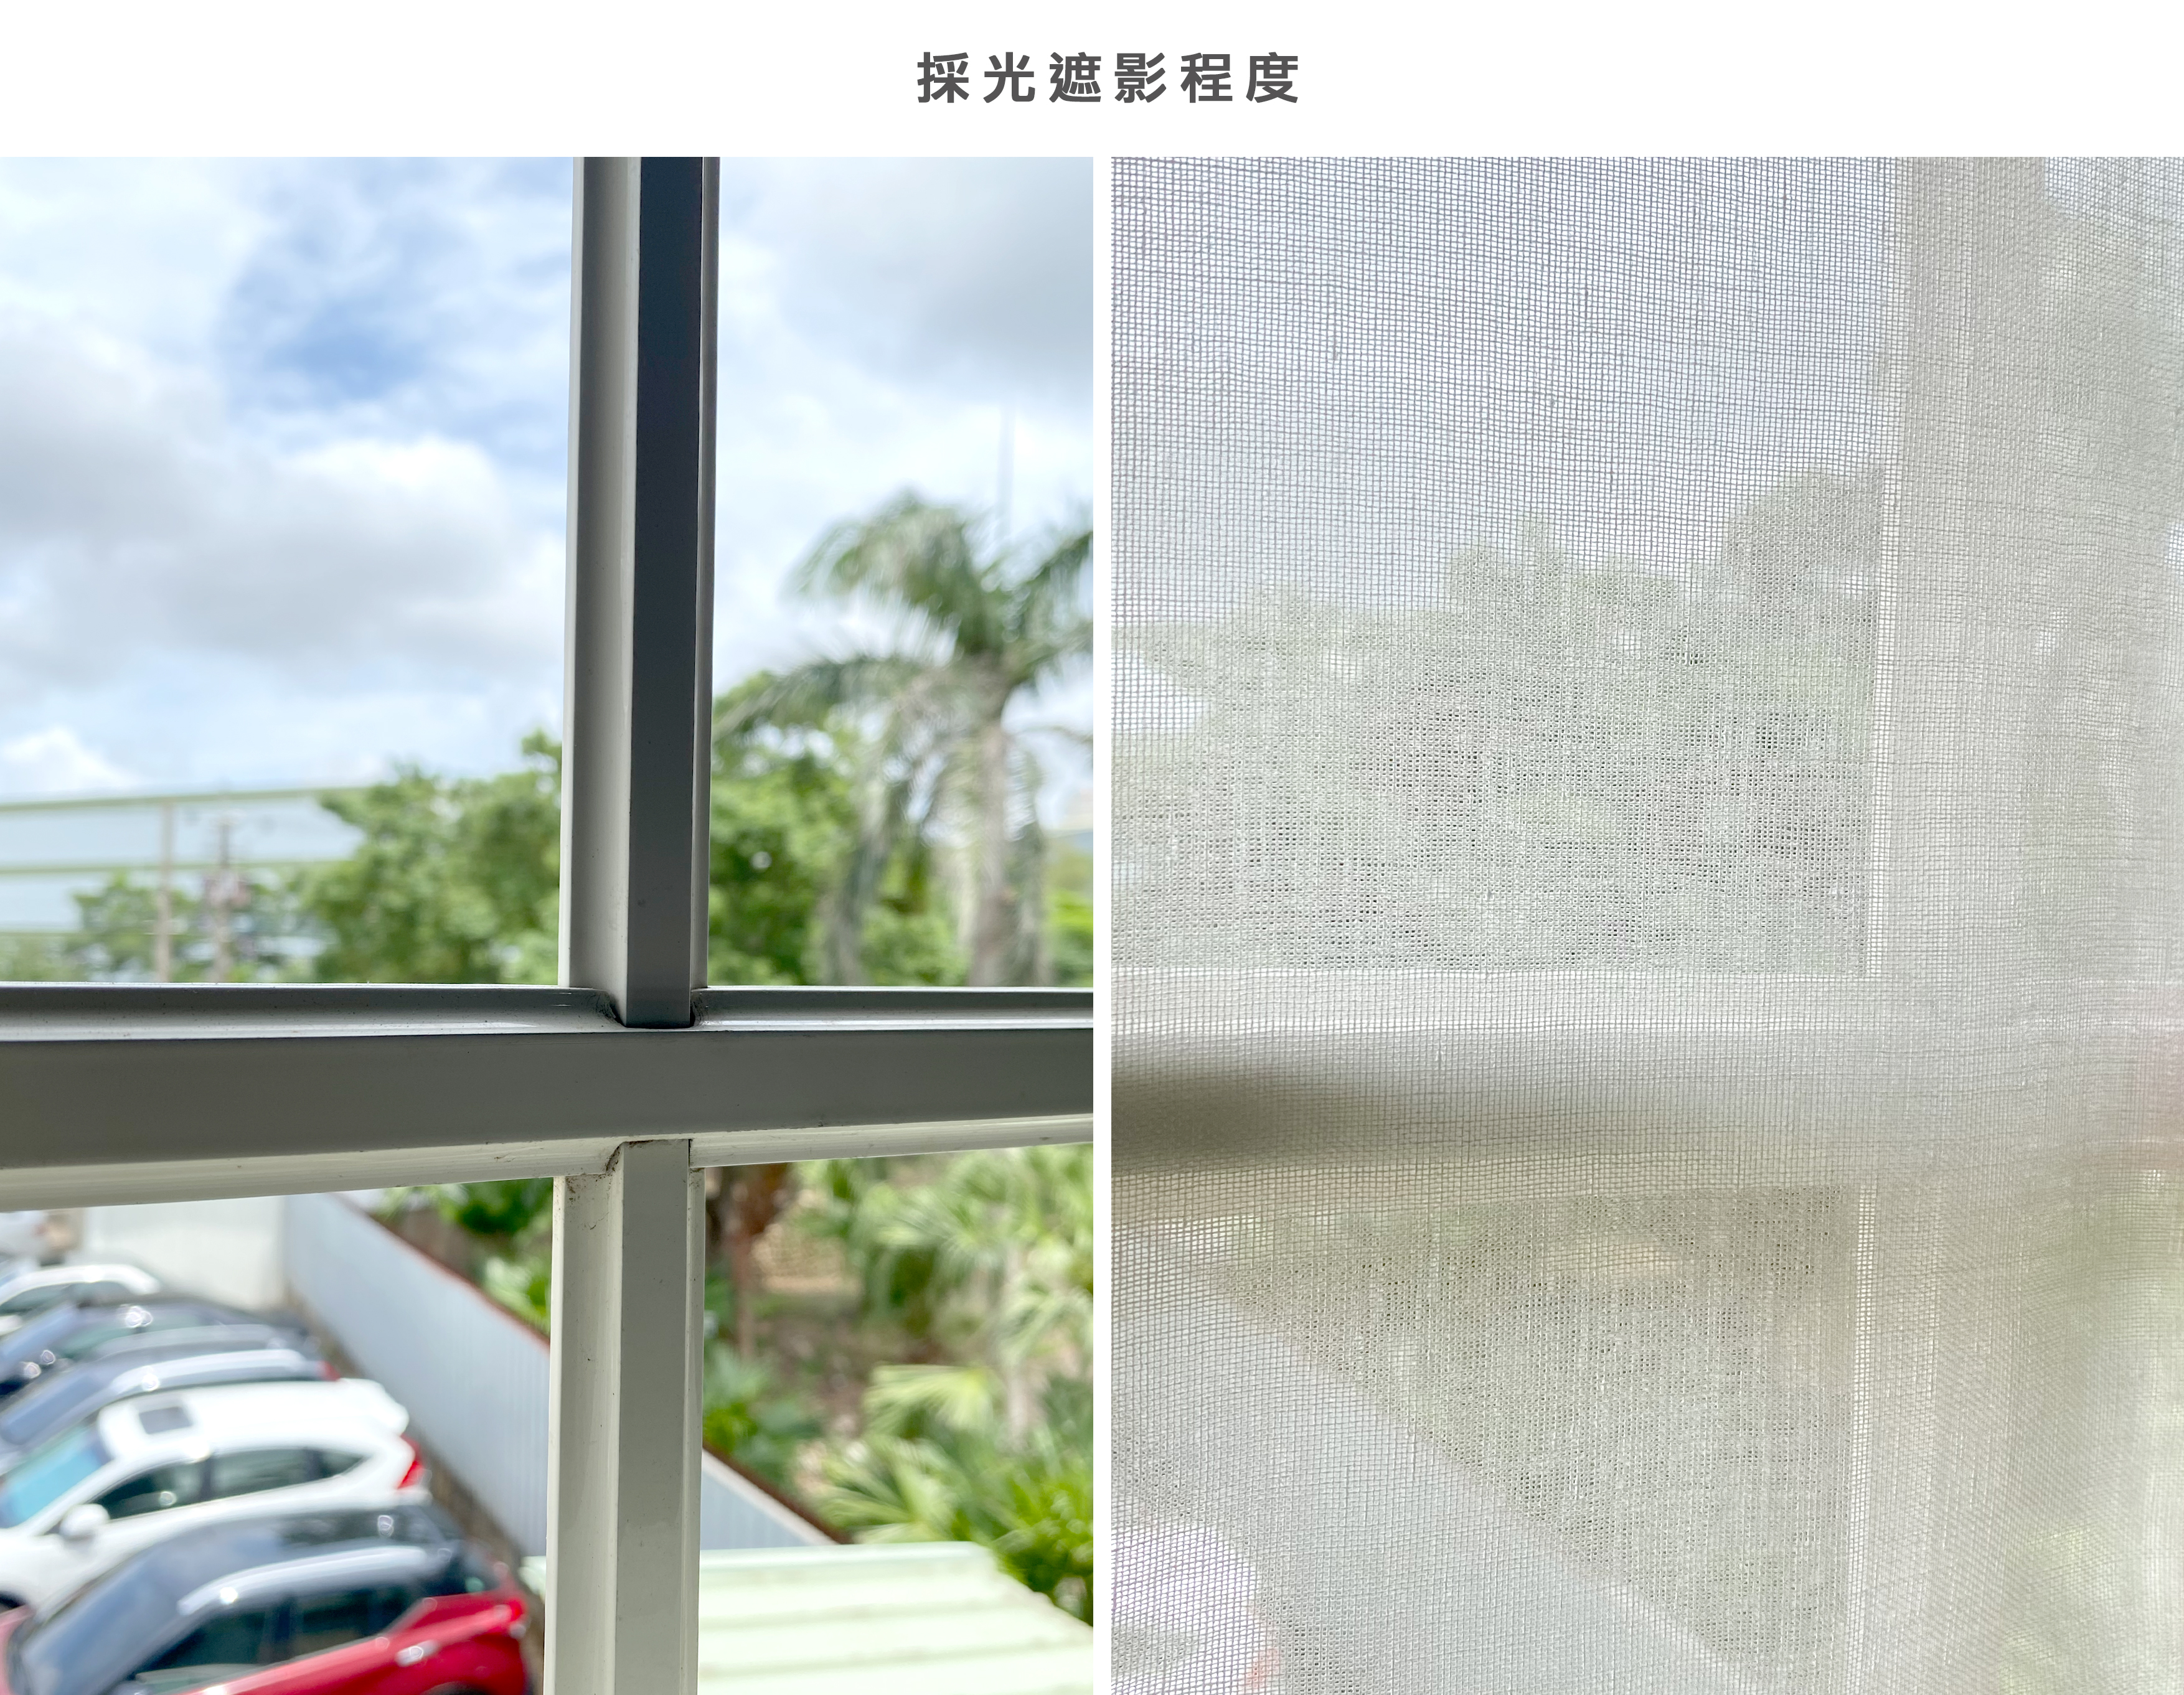 Lo-Fi House Select Curtains　Sheer Cross Sheer - Cream Child Safety／Cordless Blinds & Shades Light Filtering Blinds & Shades Semi-Transparent Blinds & Shades Motorized Blinds／Smart Blinds & Shades